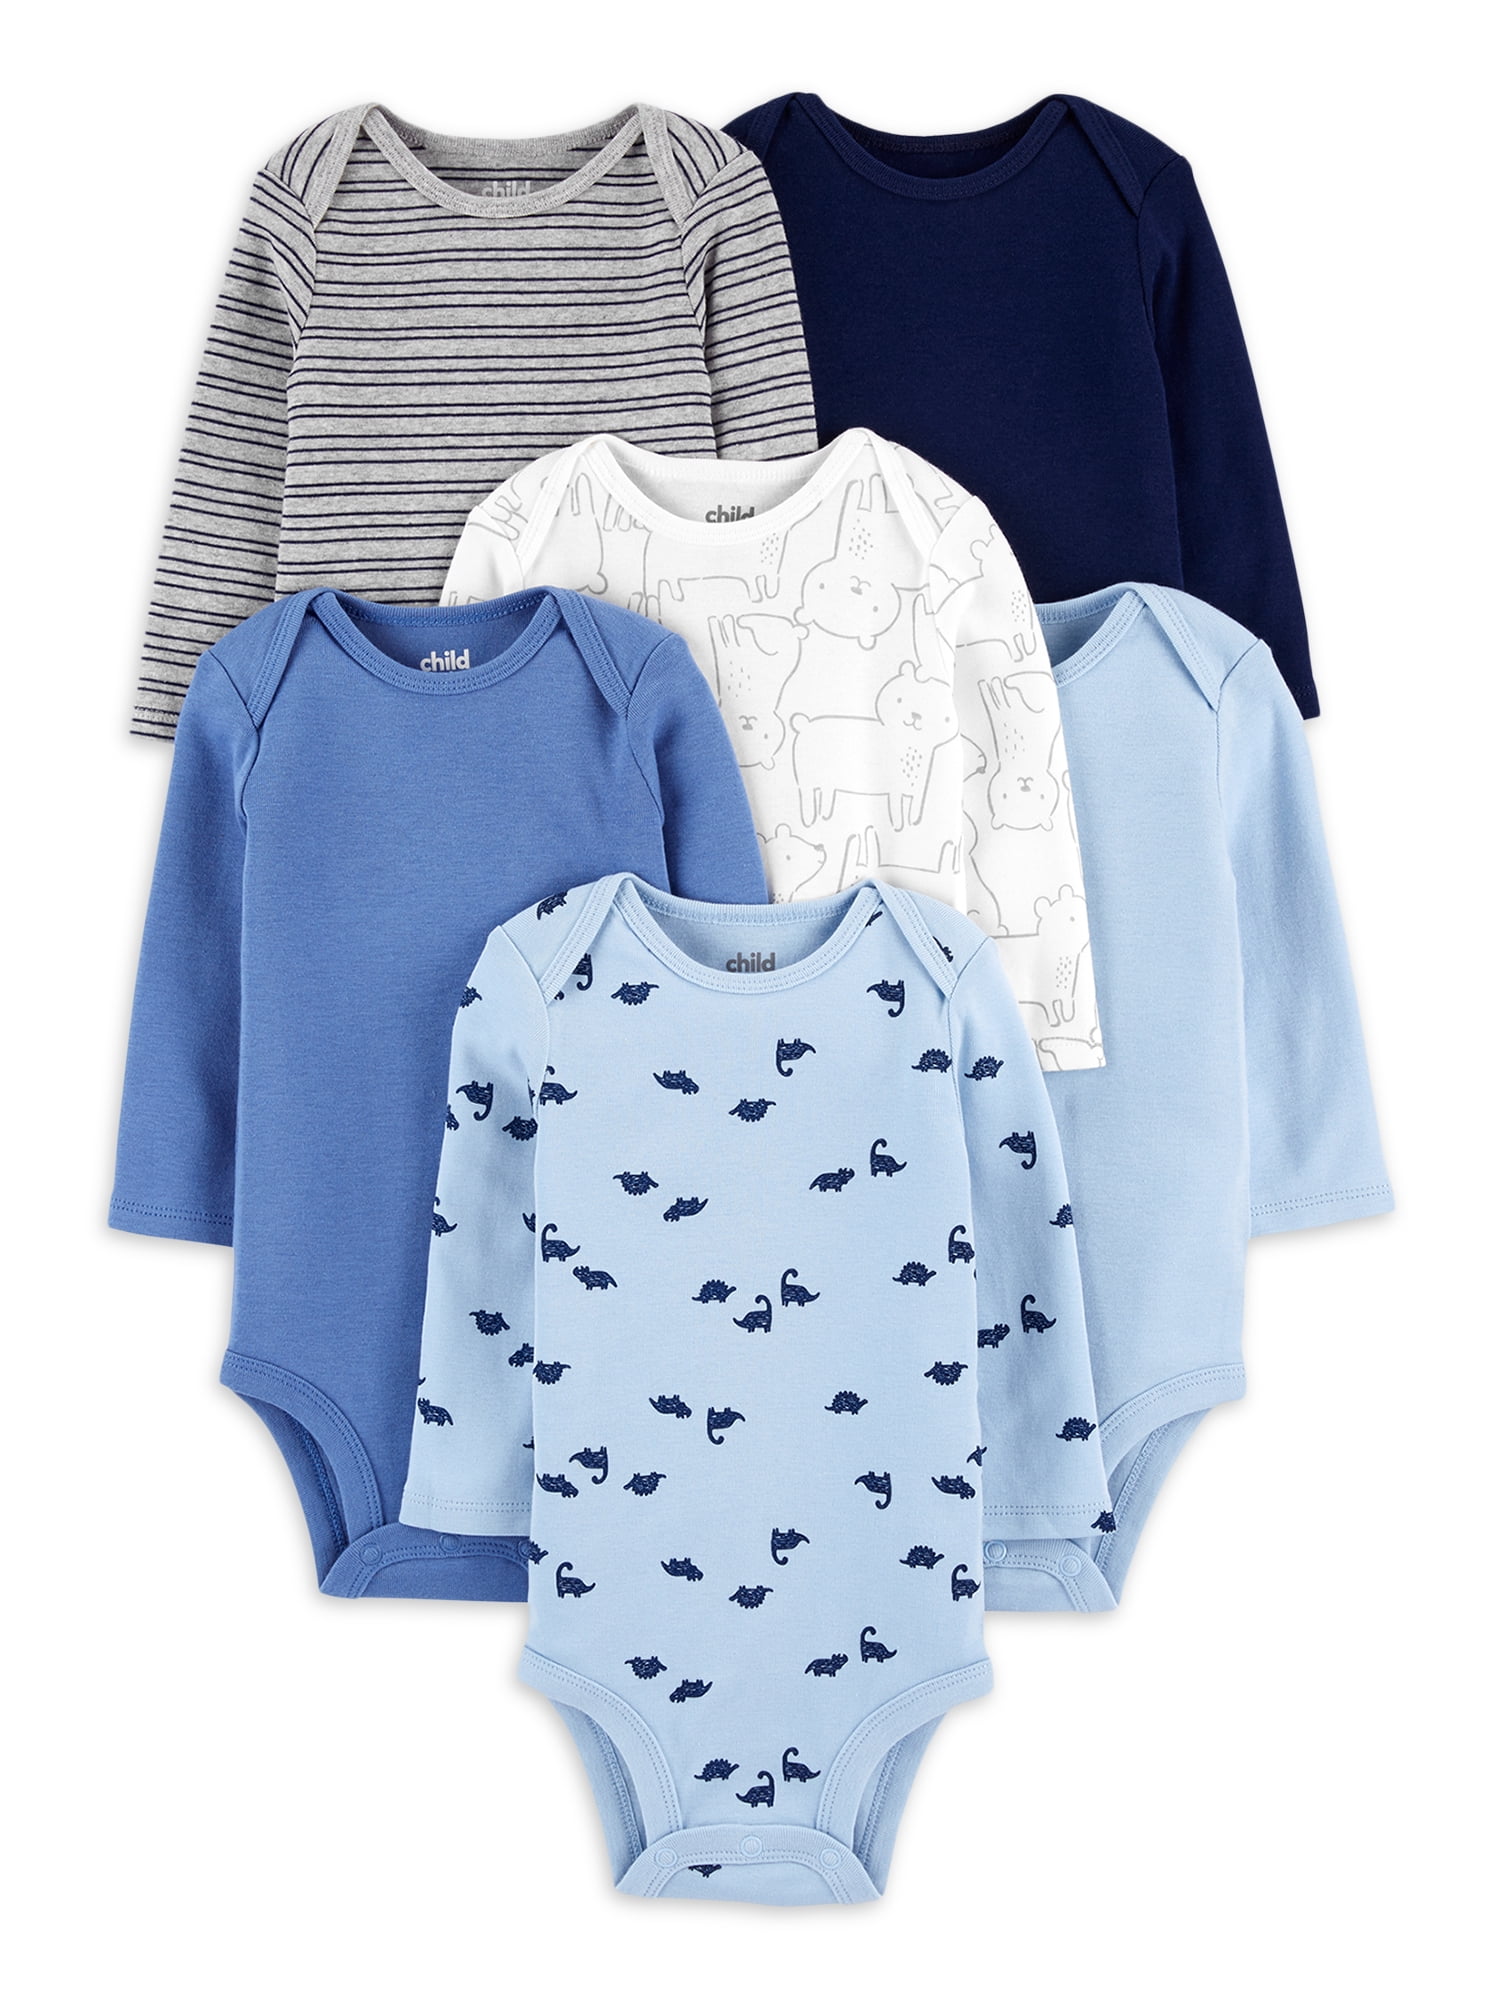 Bodysuit Baby Boy Long Sleeve 3-6 months 3 Pack Child Of Mine by Carter's